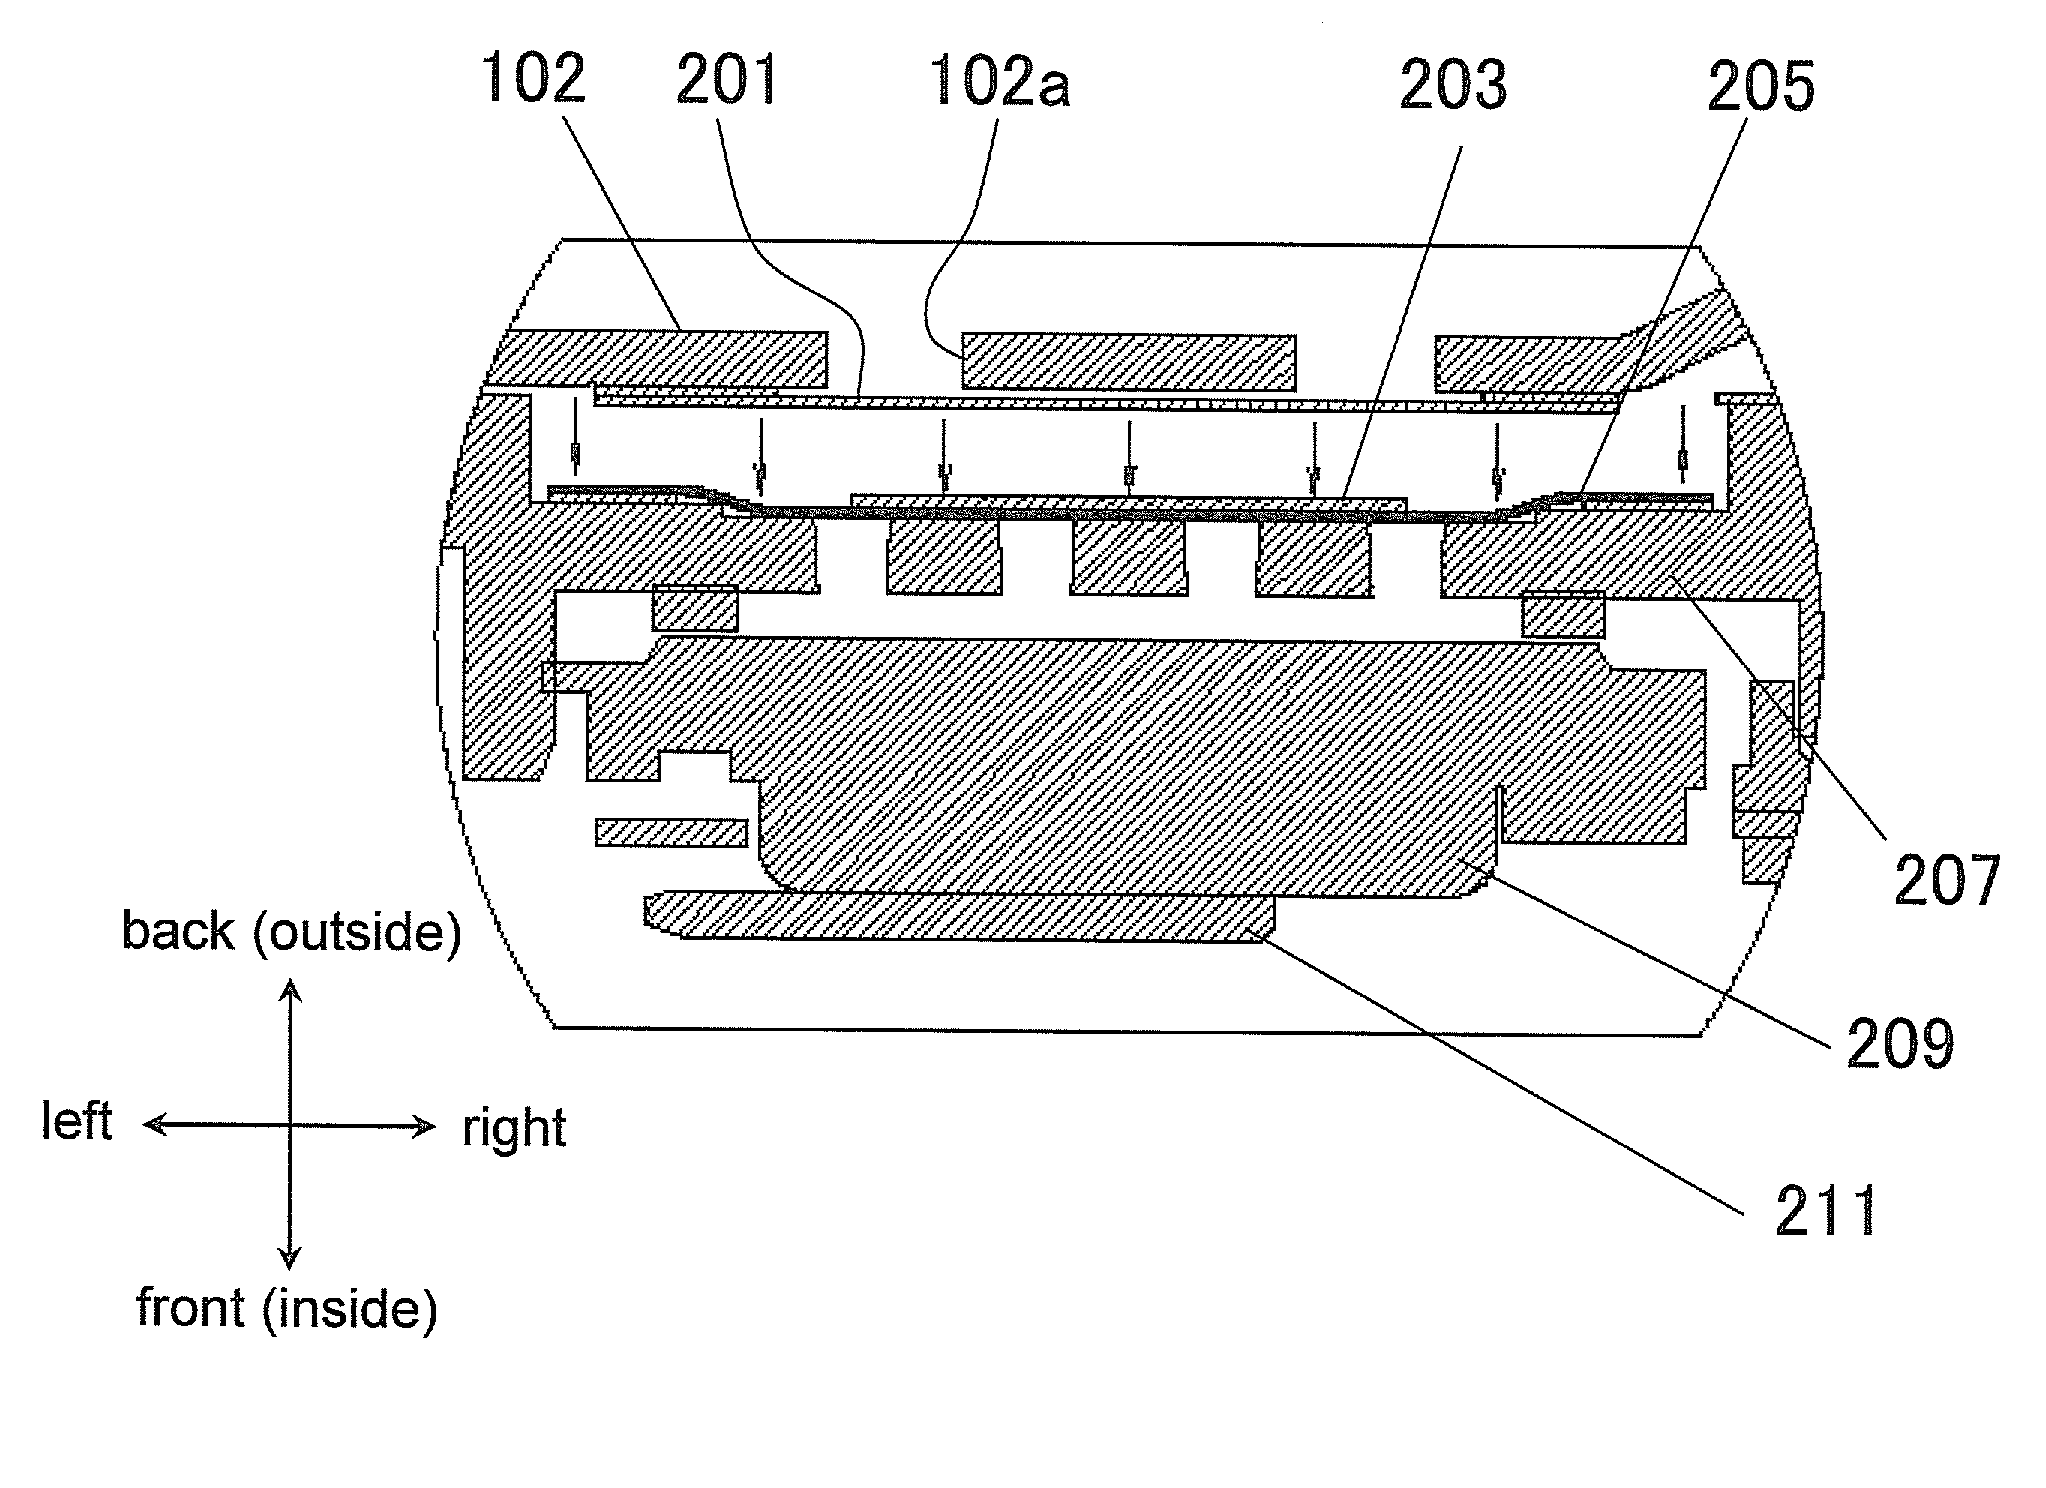 Waterproof structure for electronic device